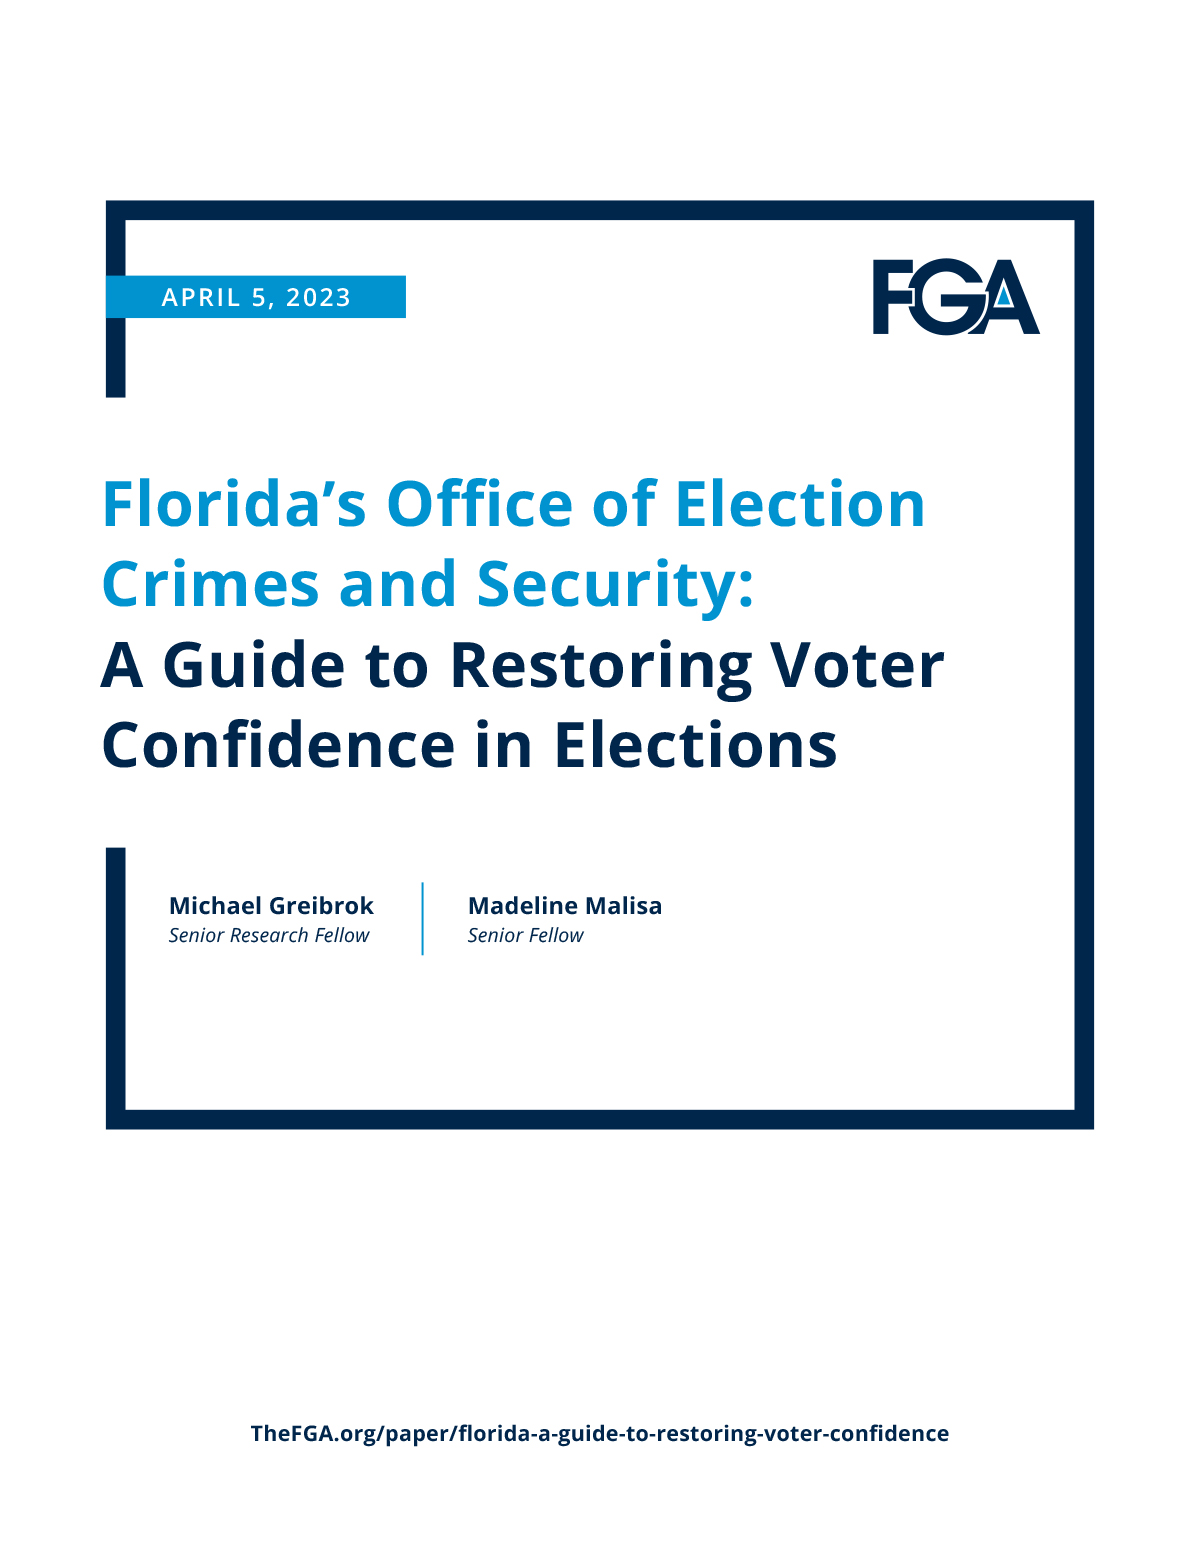 Florida’s Office of Election Crimes and Security: A Guide to Restoring Voter Confidence in Elections